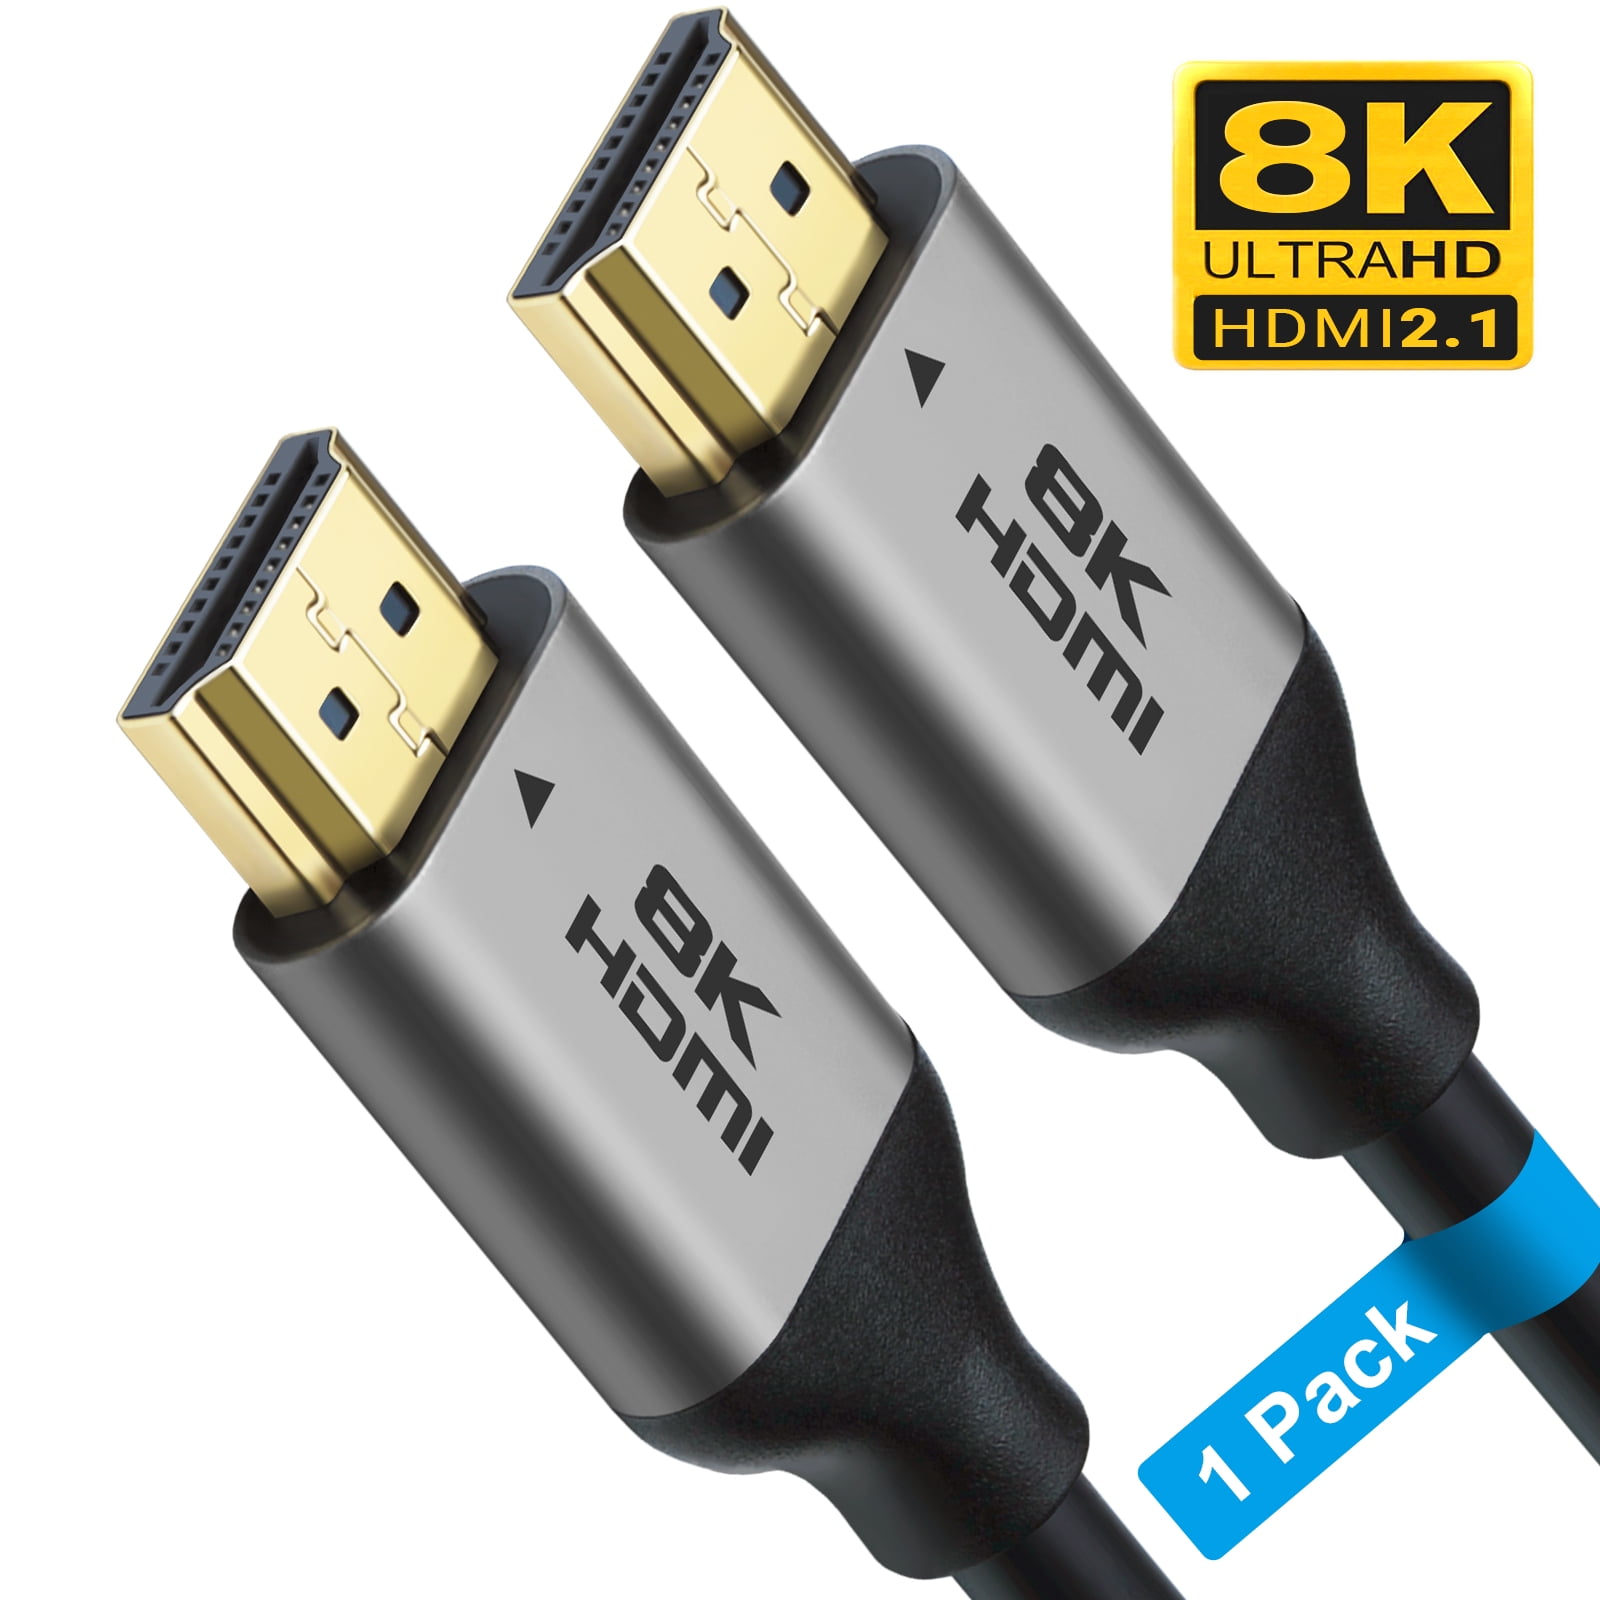 Yauhody HDMI 2.1 Cable 8K 4K 144hz, 3ft Cord 48Gbps Ultra High Speed 2.1 Cord, 100% Real 8K 60Hz, 4K 144Hz, 120Hz, 5K, 10K, Full HD 1080P, 3D, HDCP 2.2&2.3,